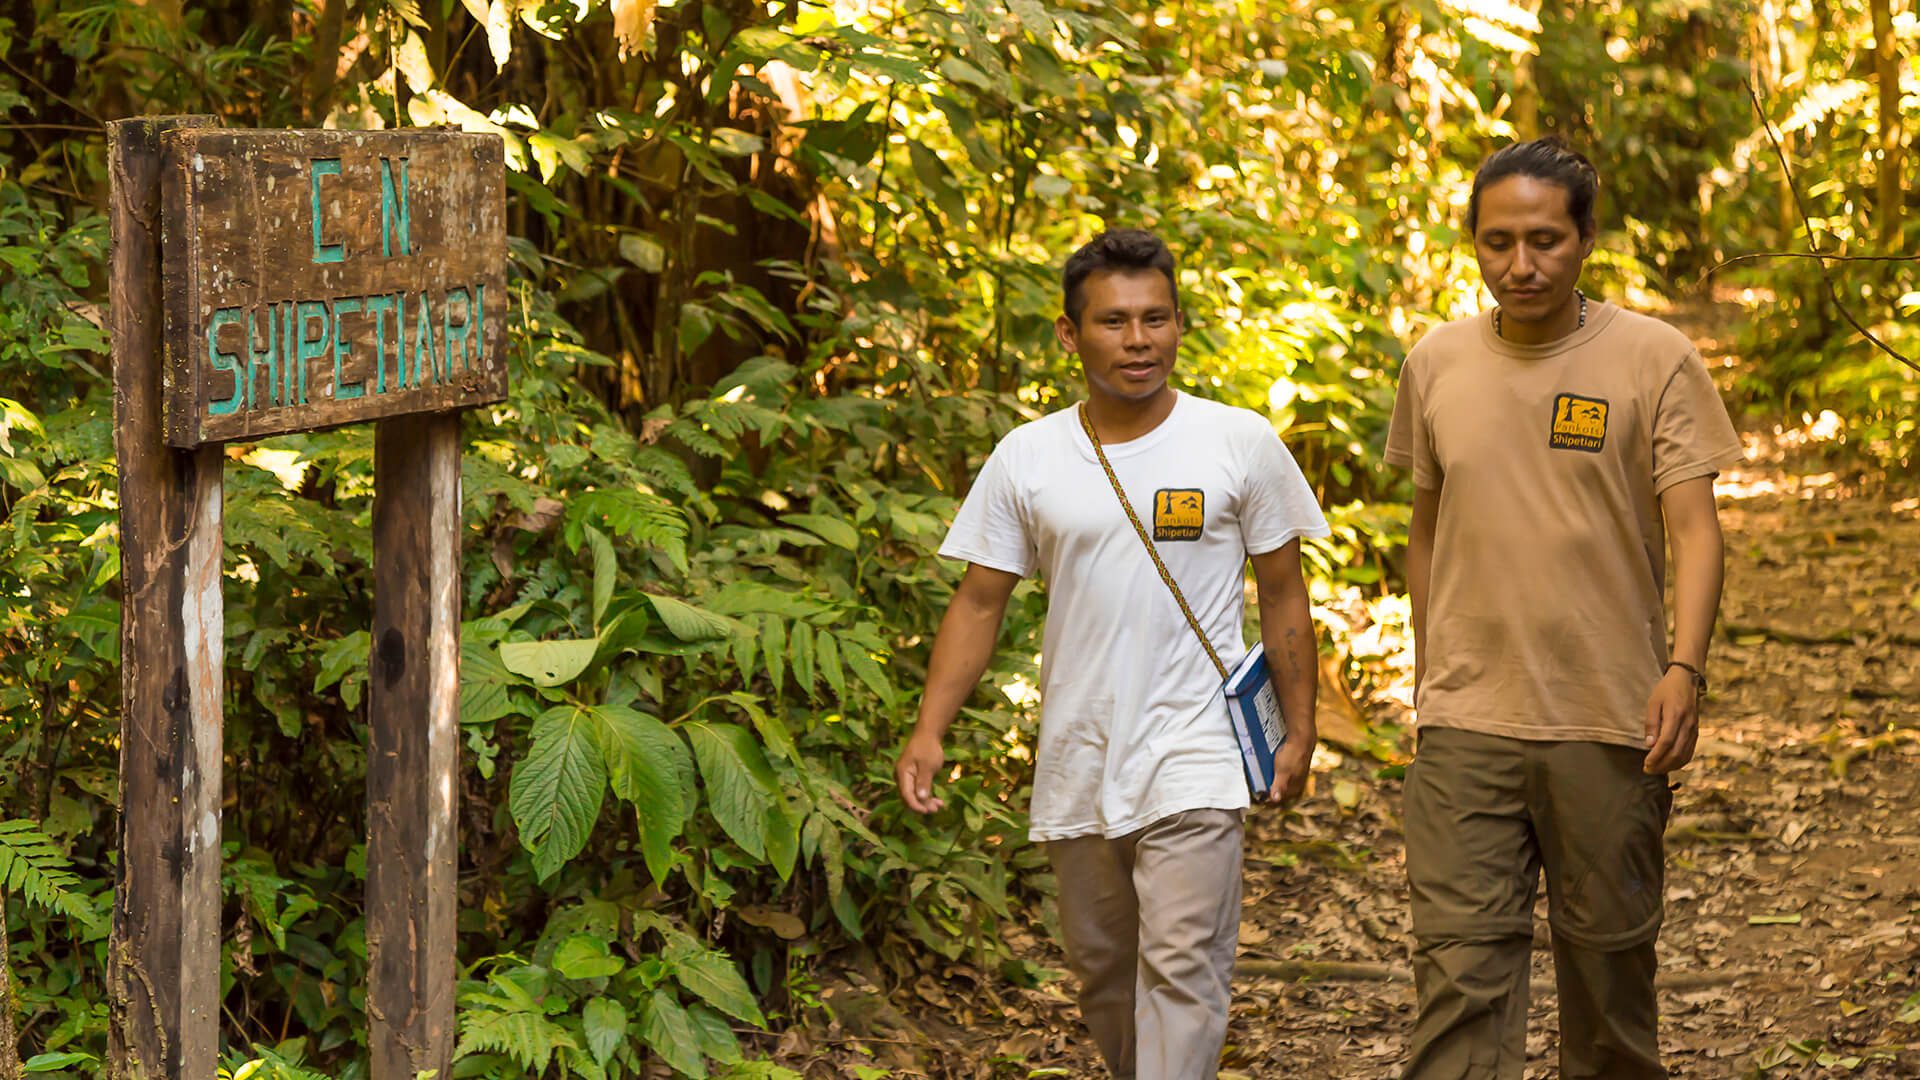 Angel (young Matsigenka) and Rosbert from our Ops Team walking along the trail connecting Shipetiari and the Pankotsi Lodge in Manu - RESPONSible Travel Peru